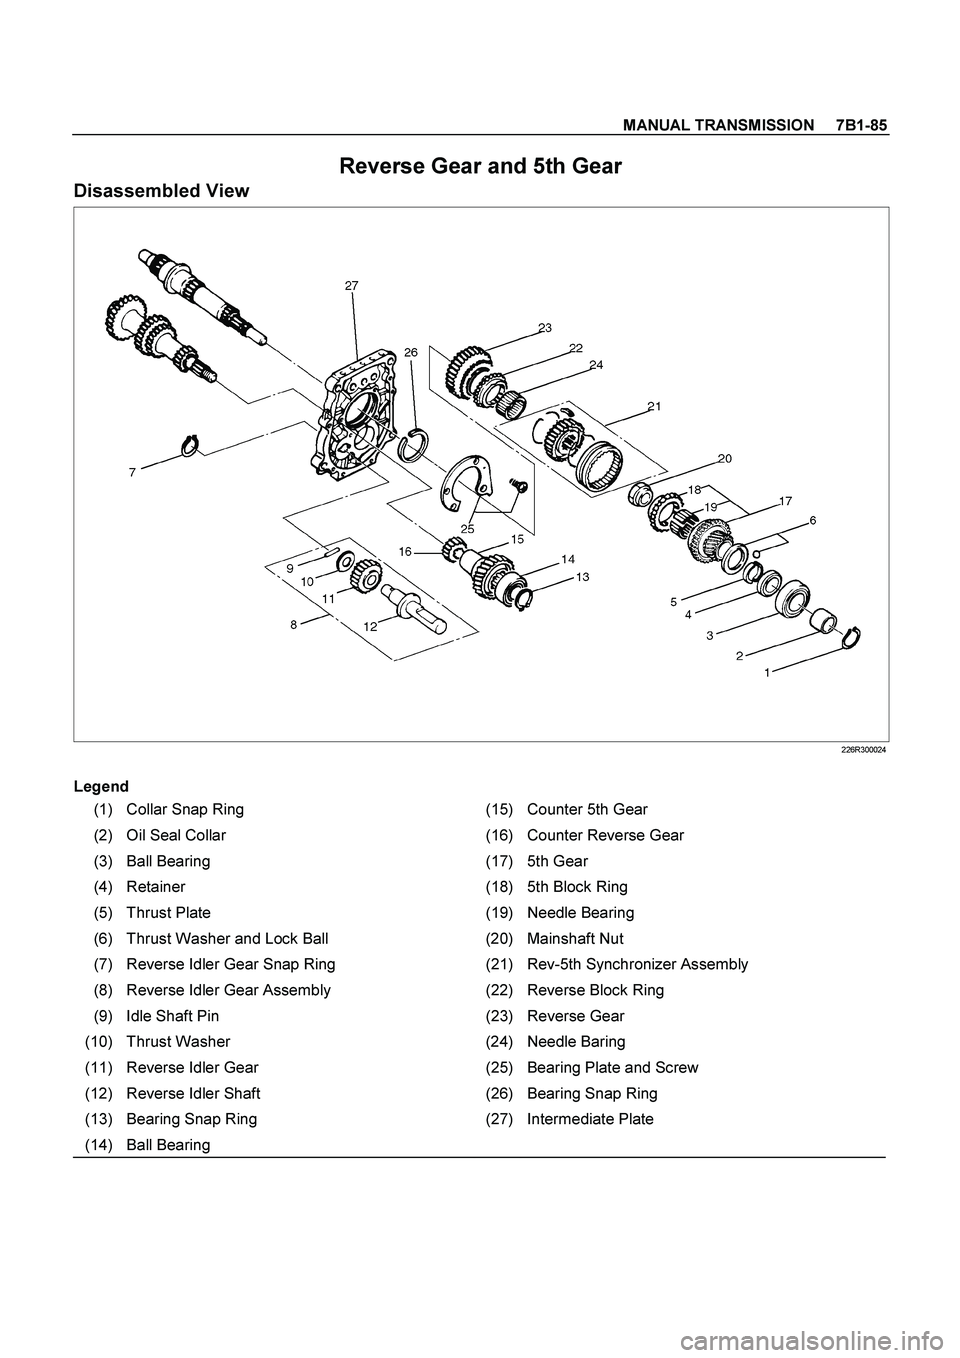 ISUZU TF SERIES 2004  Workshop Manual MANUAL TRANSMISSION     7B1-85
 
Reverse Gear and 5th Gear 
Disassembled View 
 226R300024 
 
Legend
 
(1)  Collar Snap Ring  (15) Counter 5th Gear 
(2)  Oil Seal Collar  (16) Counter Reverse Gear 
(3